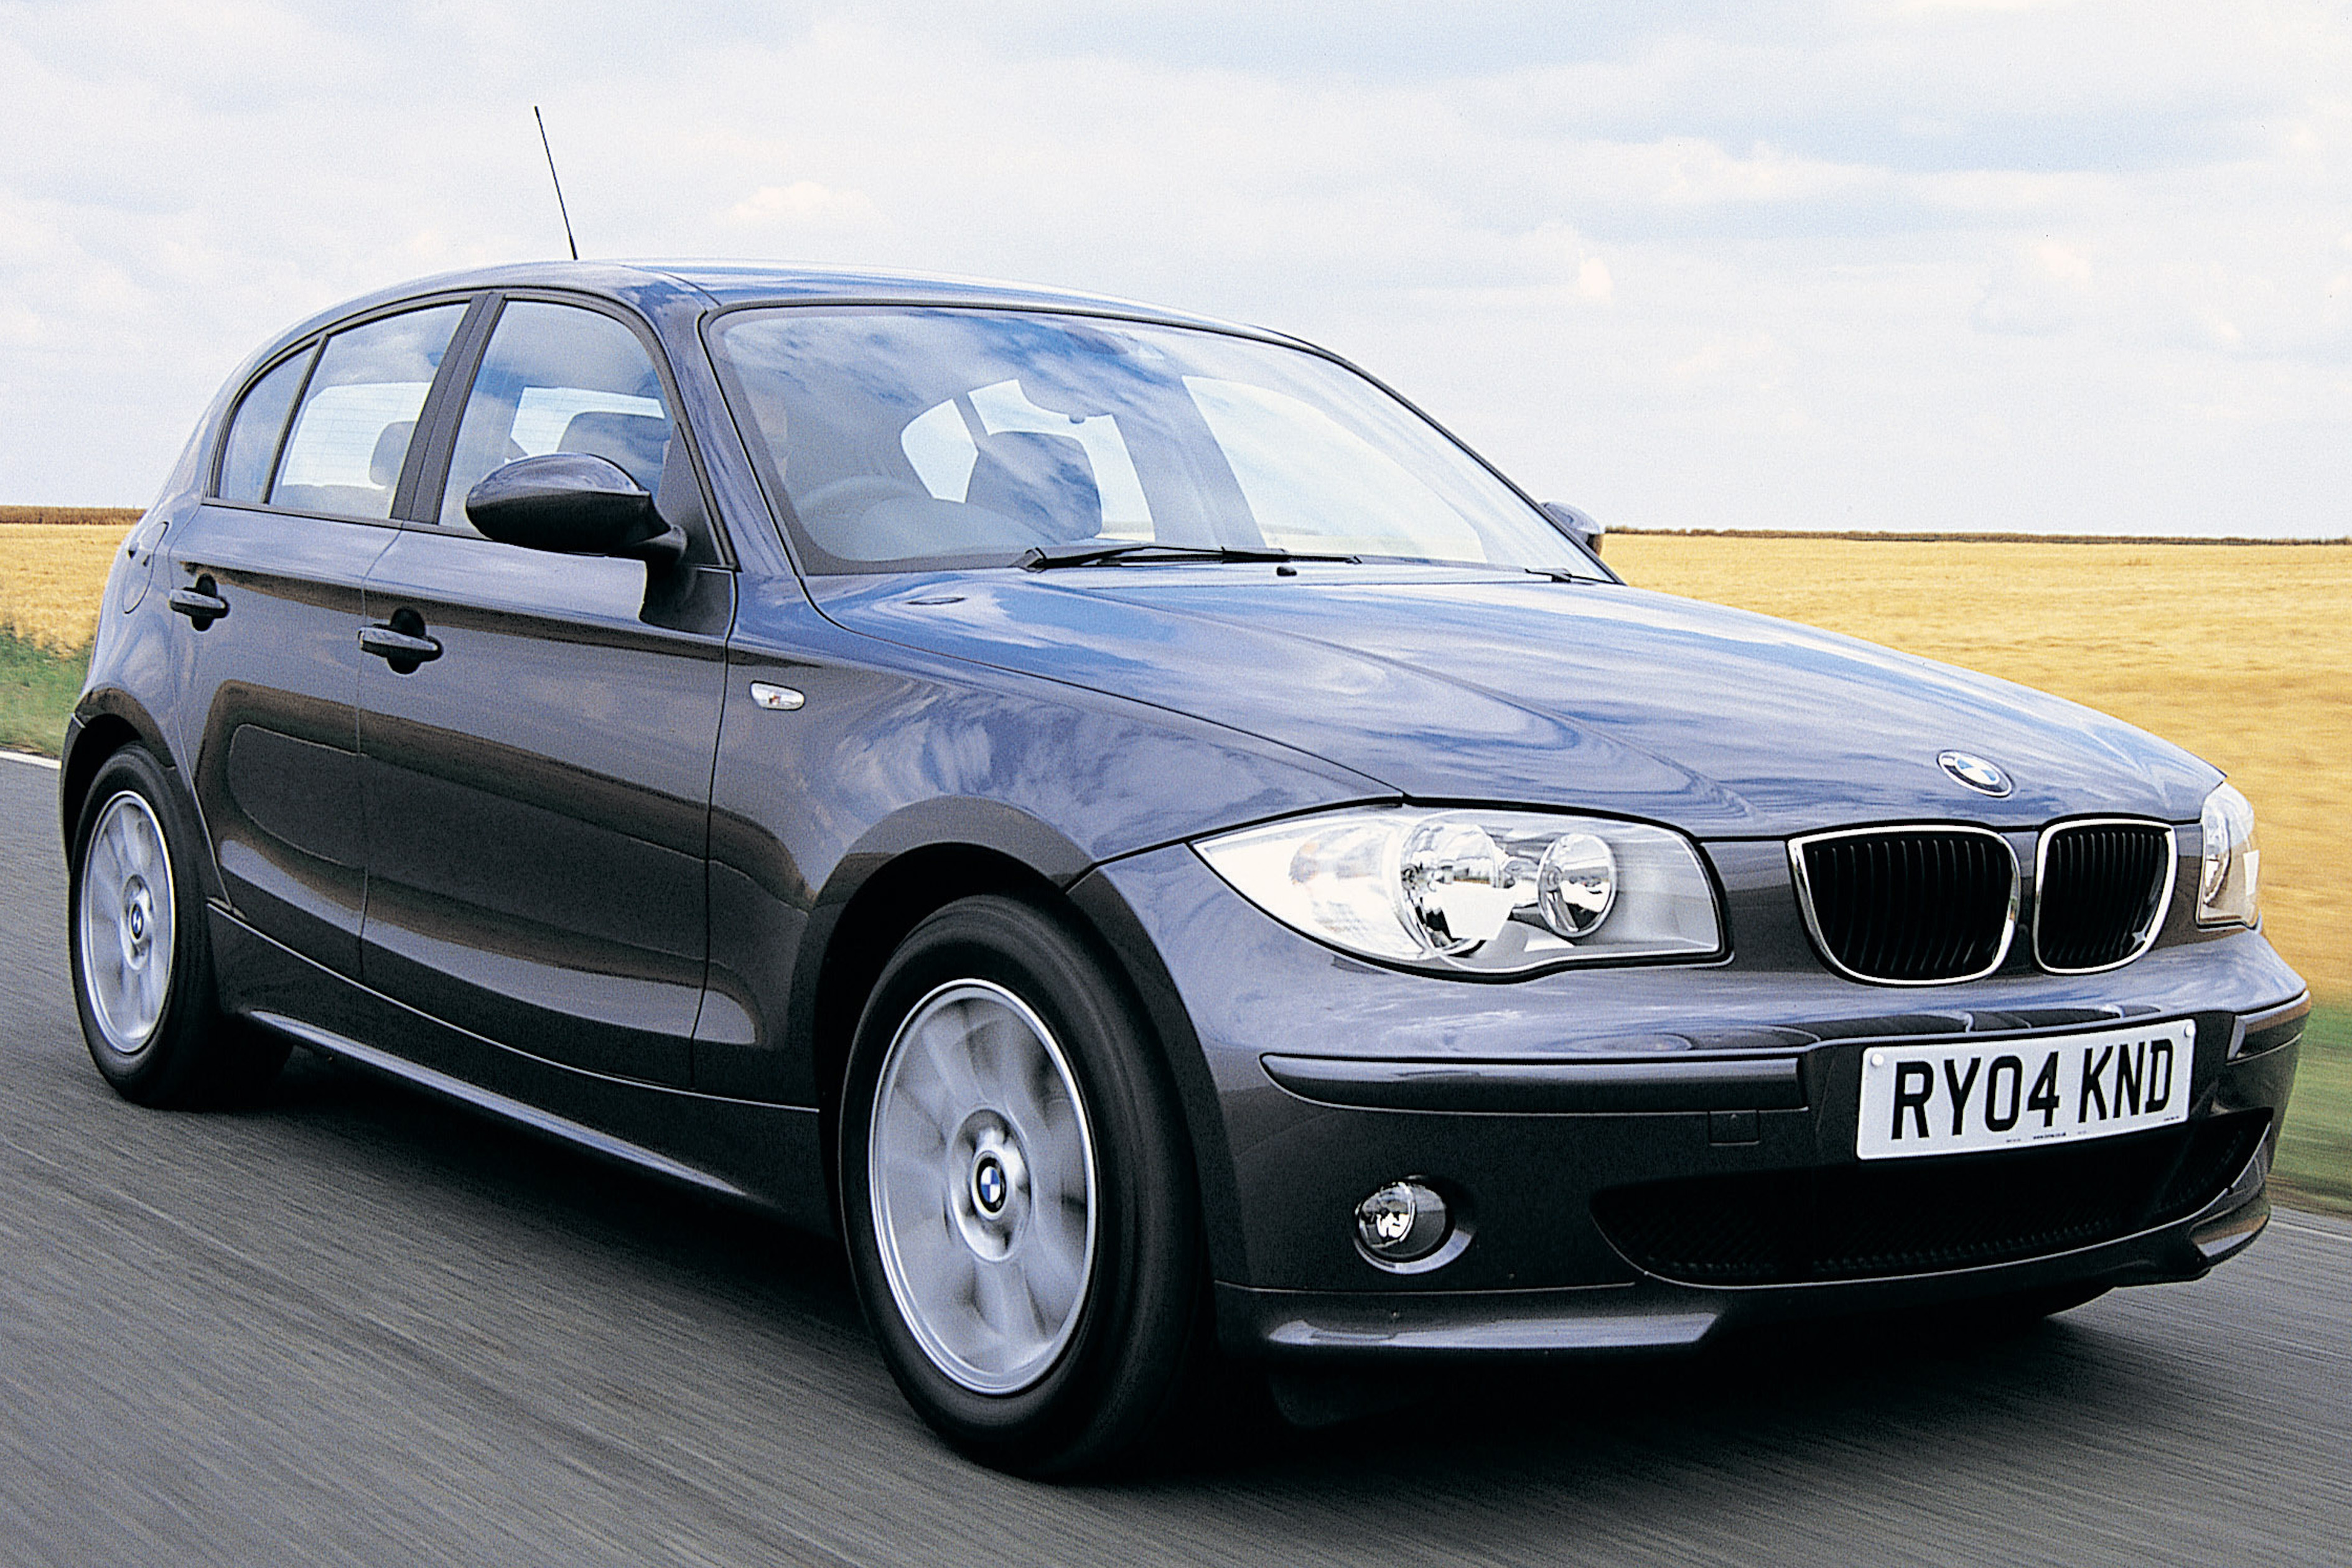 BMW 116i SE fivedoor (2004 to date) Auto Express